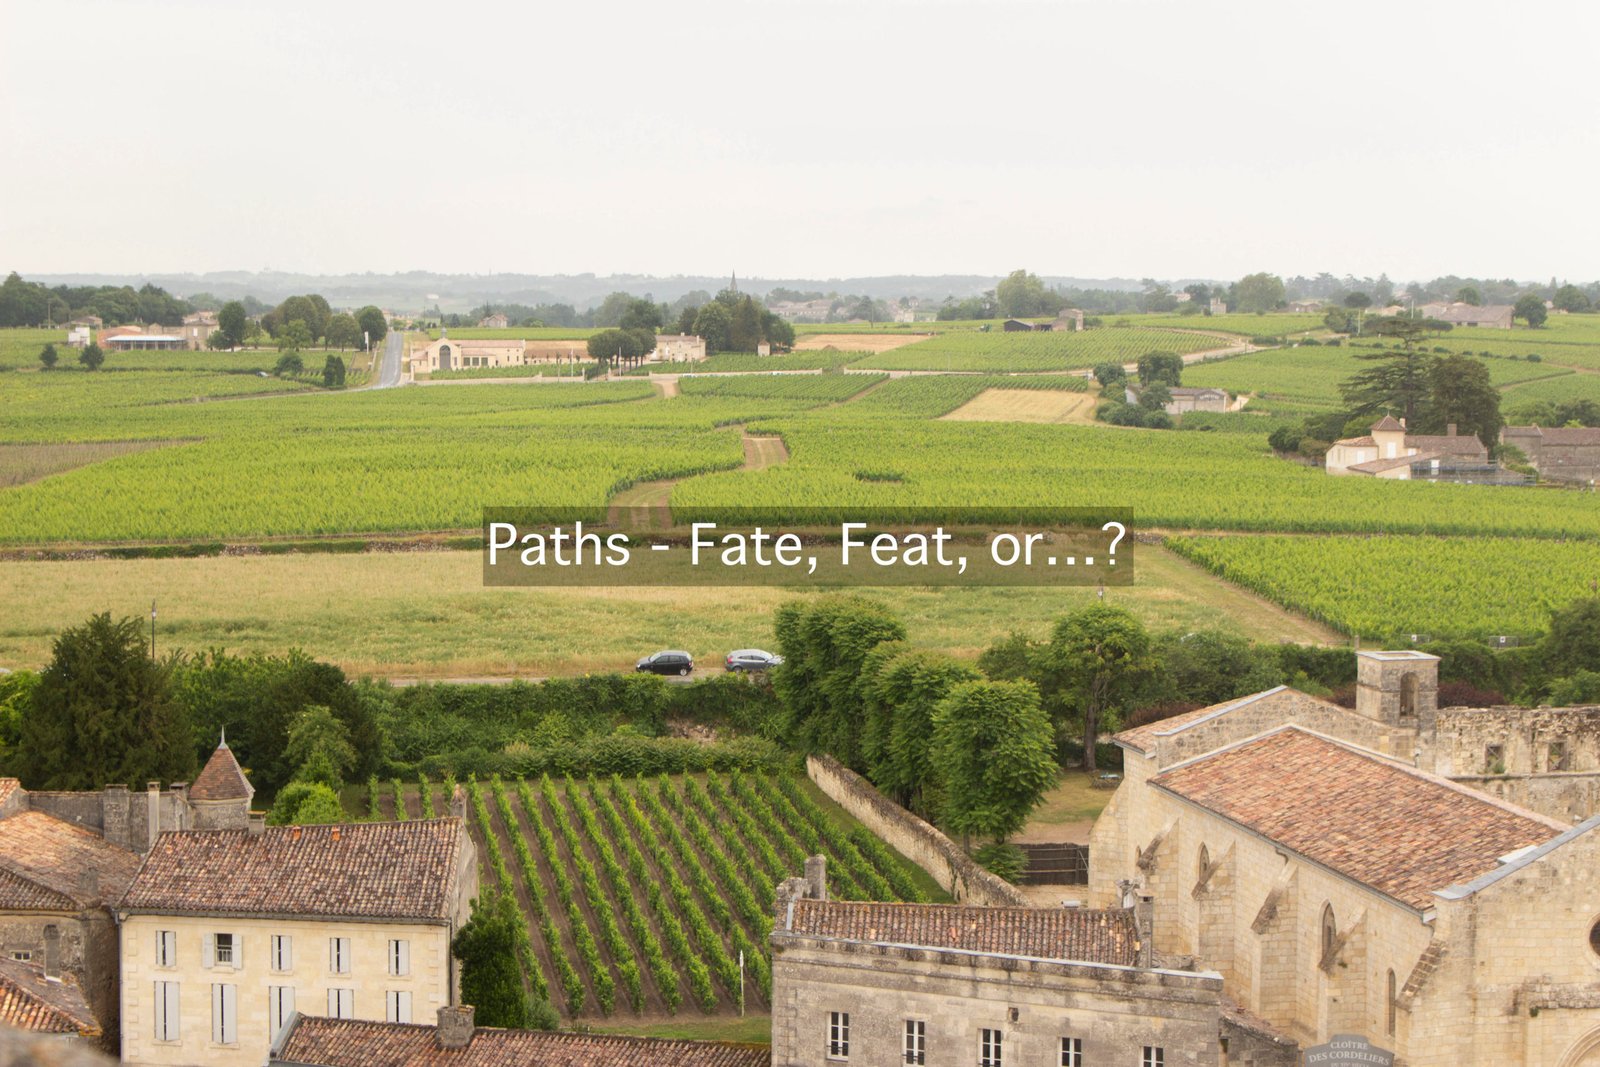 Image shows a small huddle of French houses in front of vast green countryside. Two roads weave out in different directions.